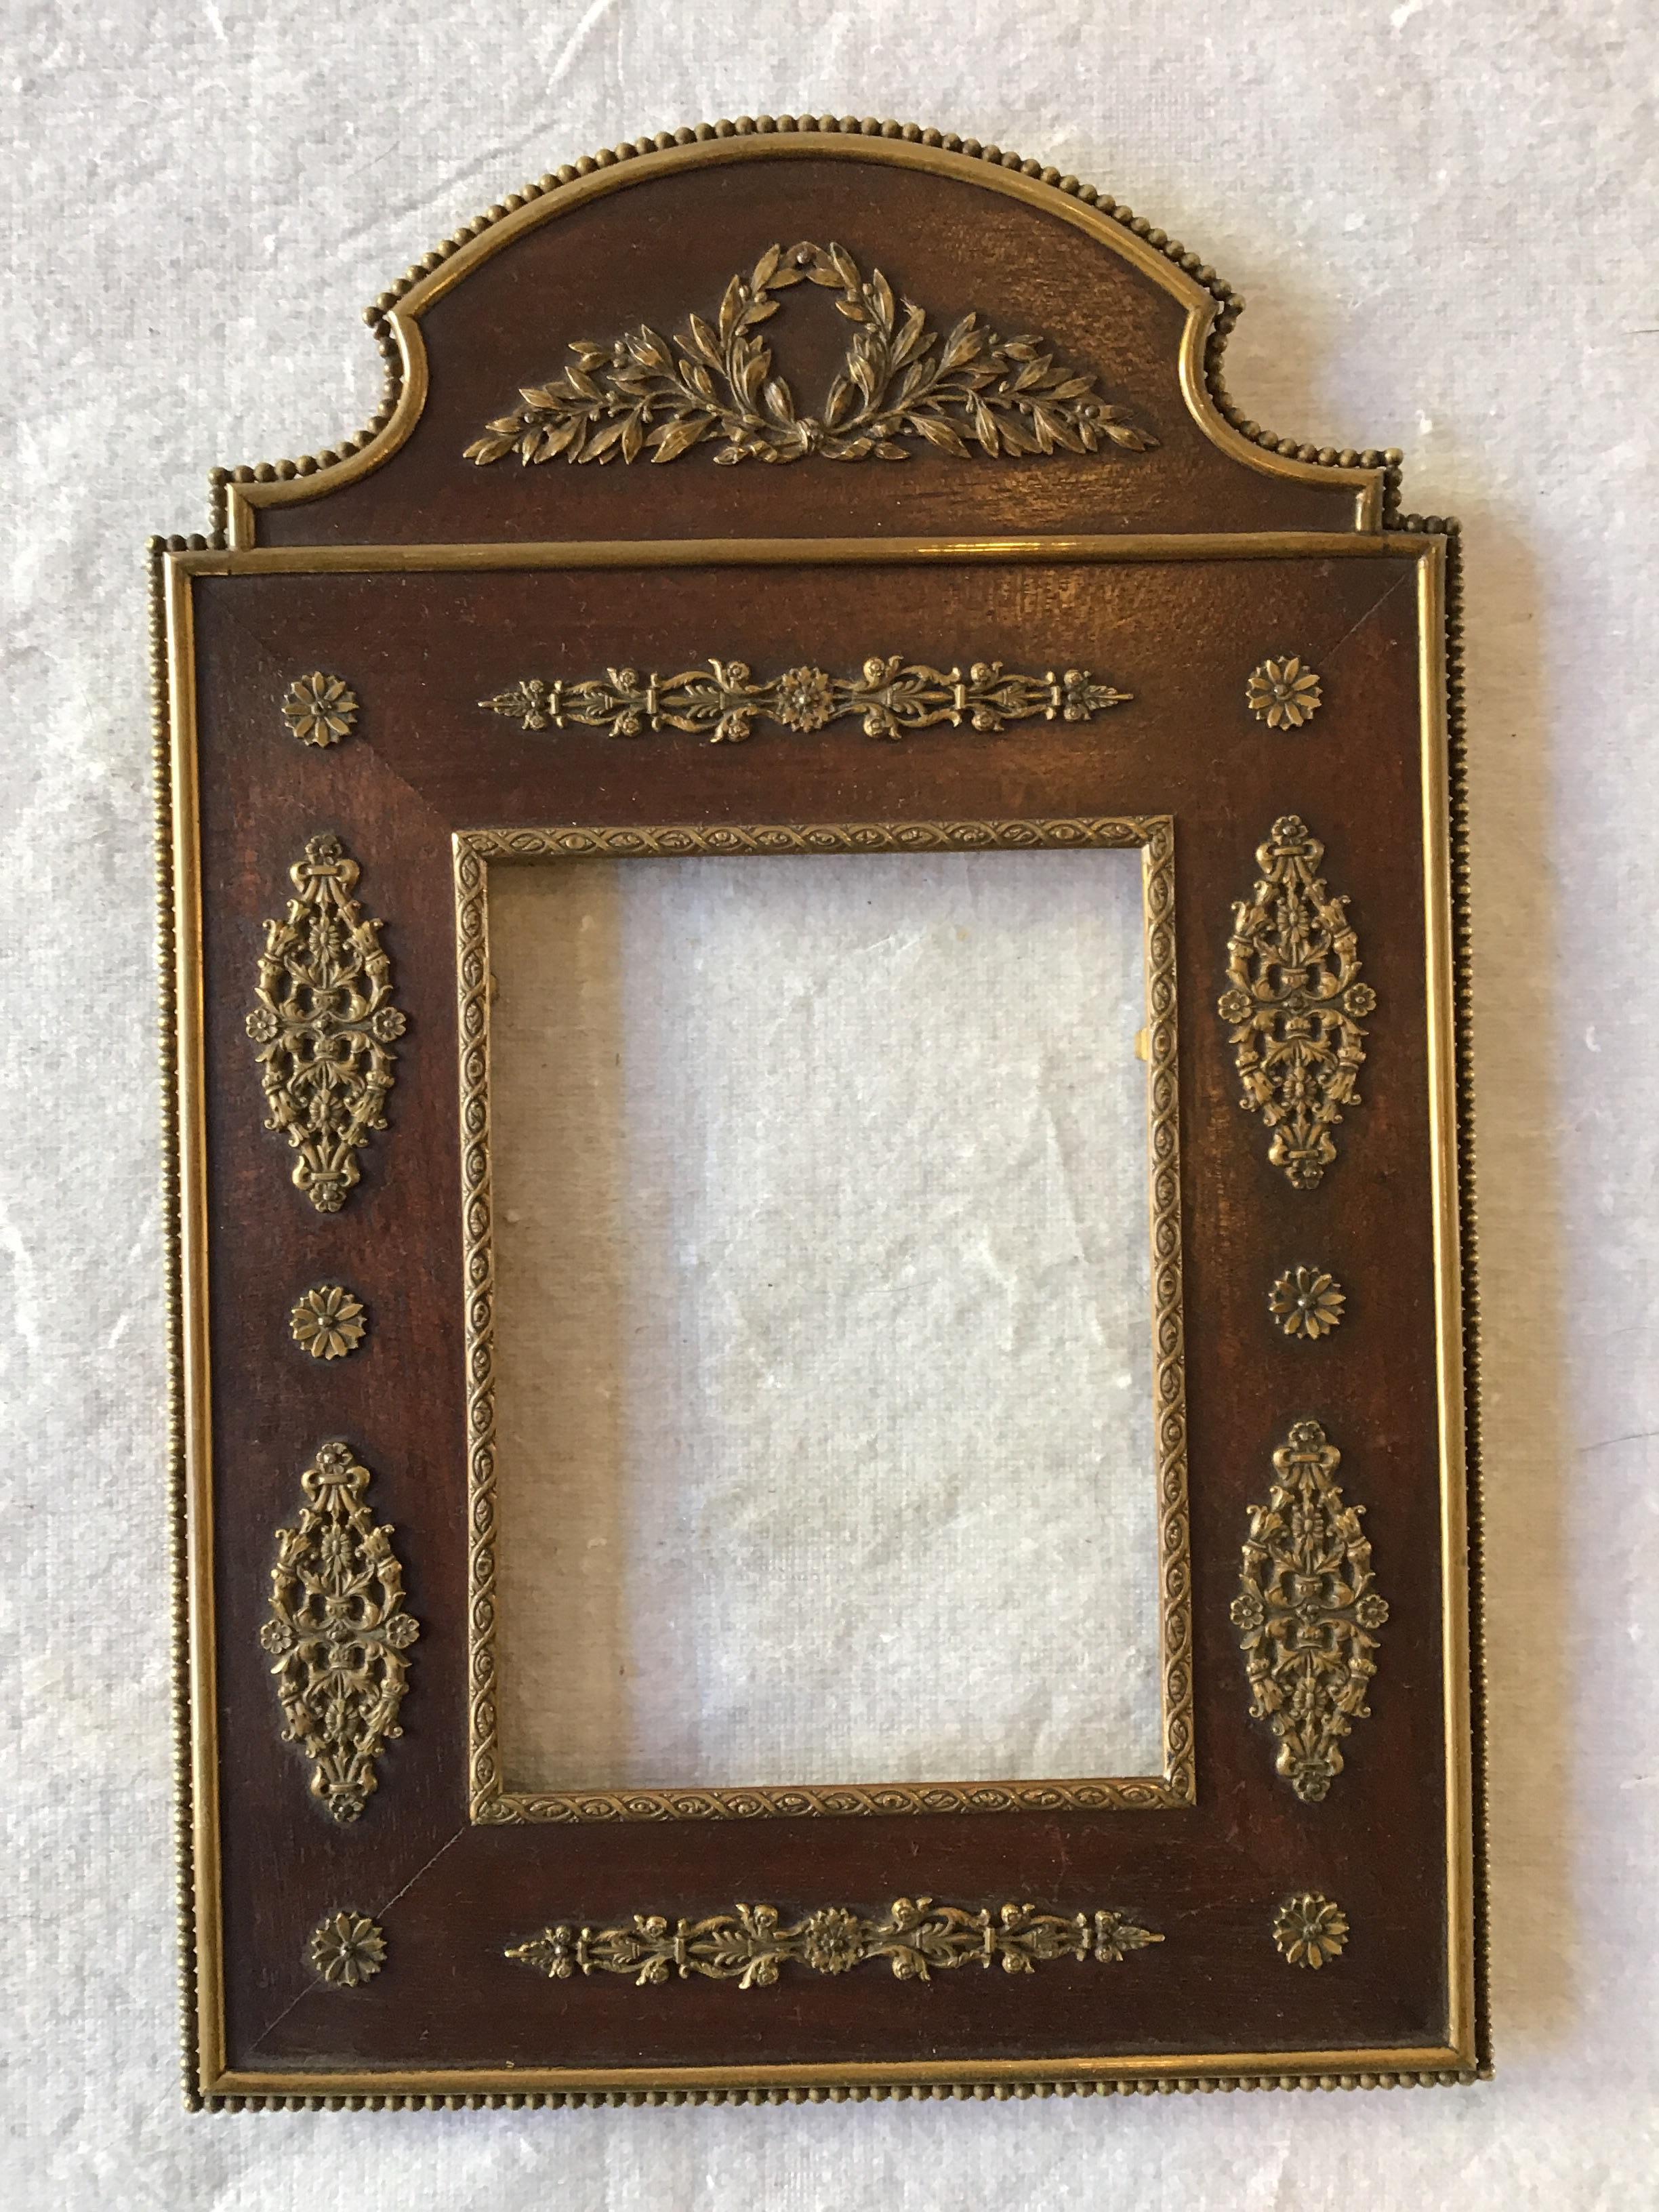 1890s French neoclassical wood and bronze frame. No glass or easel backing.
Measurement of inset is 4 x 5.5.